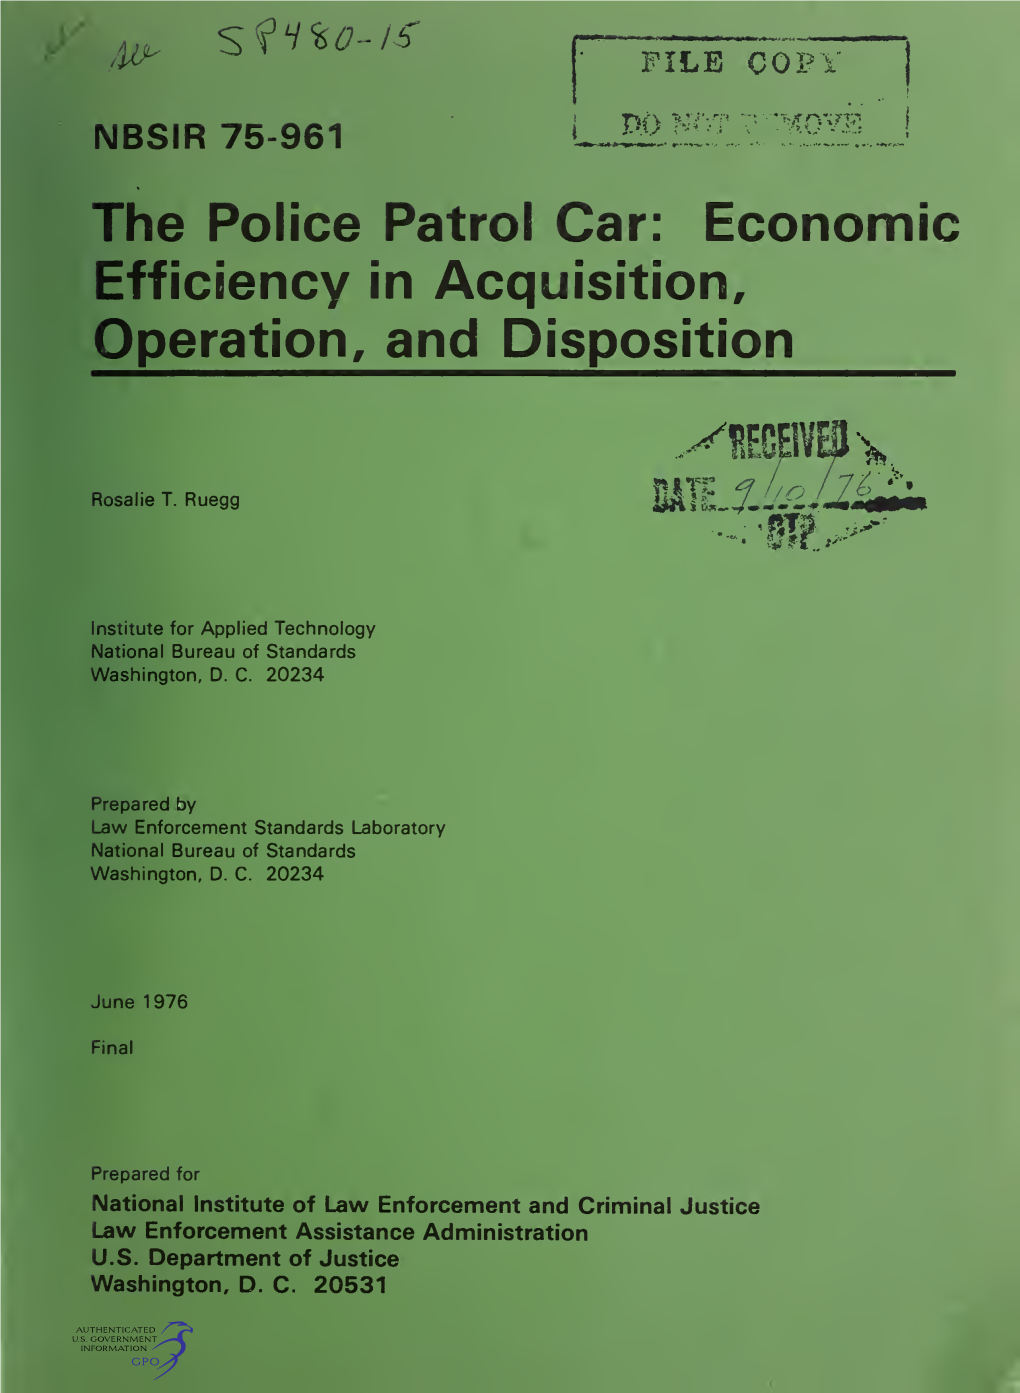 The Police Patrol Car: Economic Efficiency in Acquisition, Operation, and Disposition